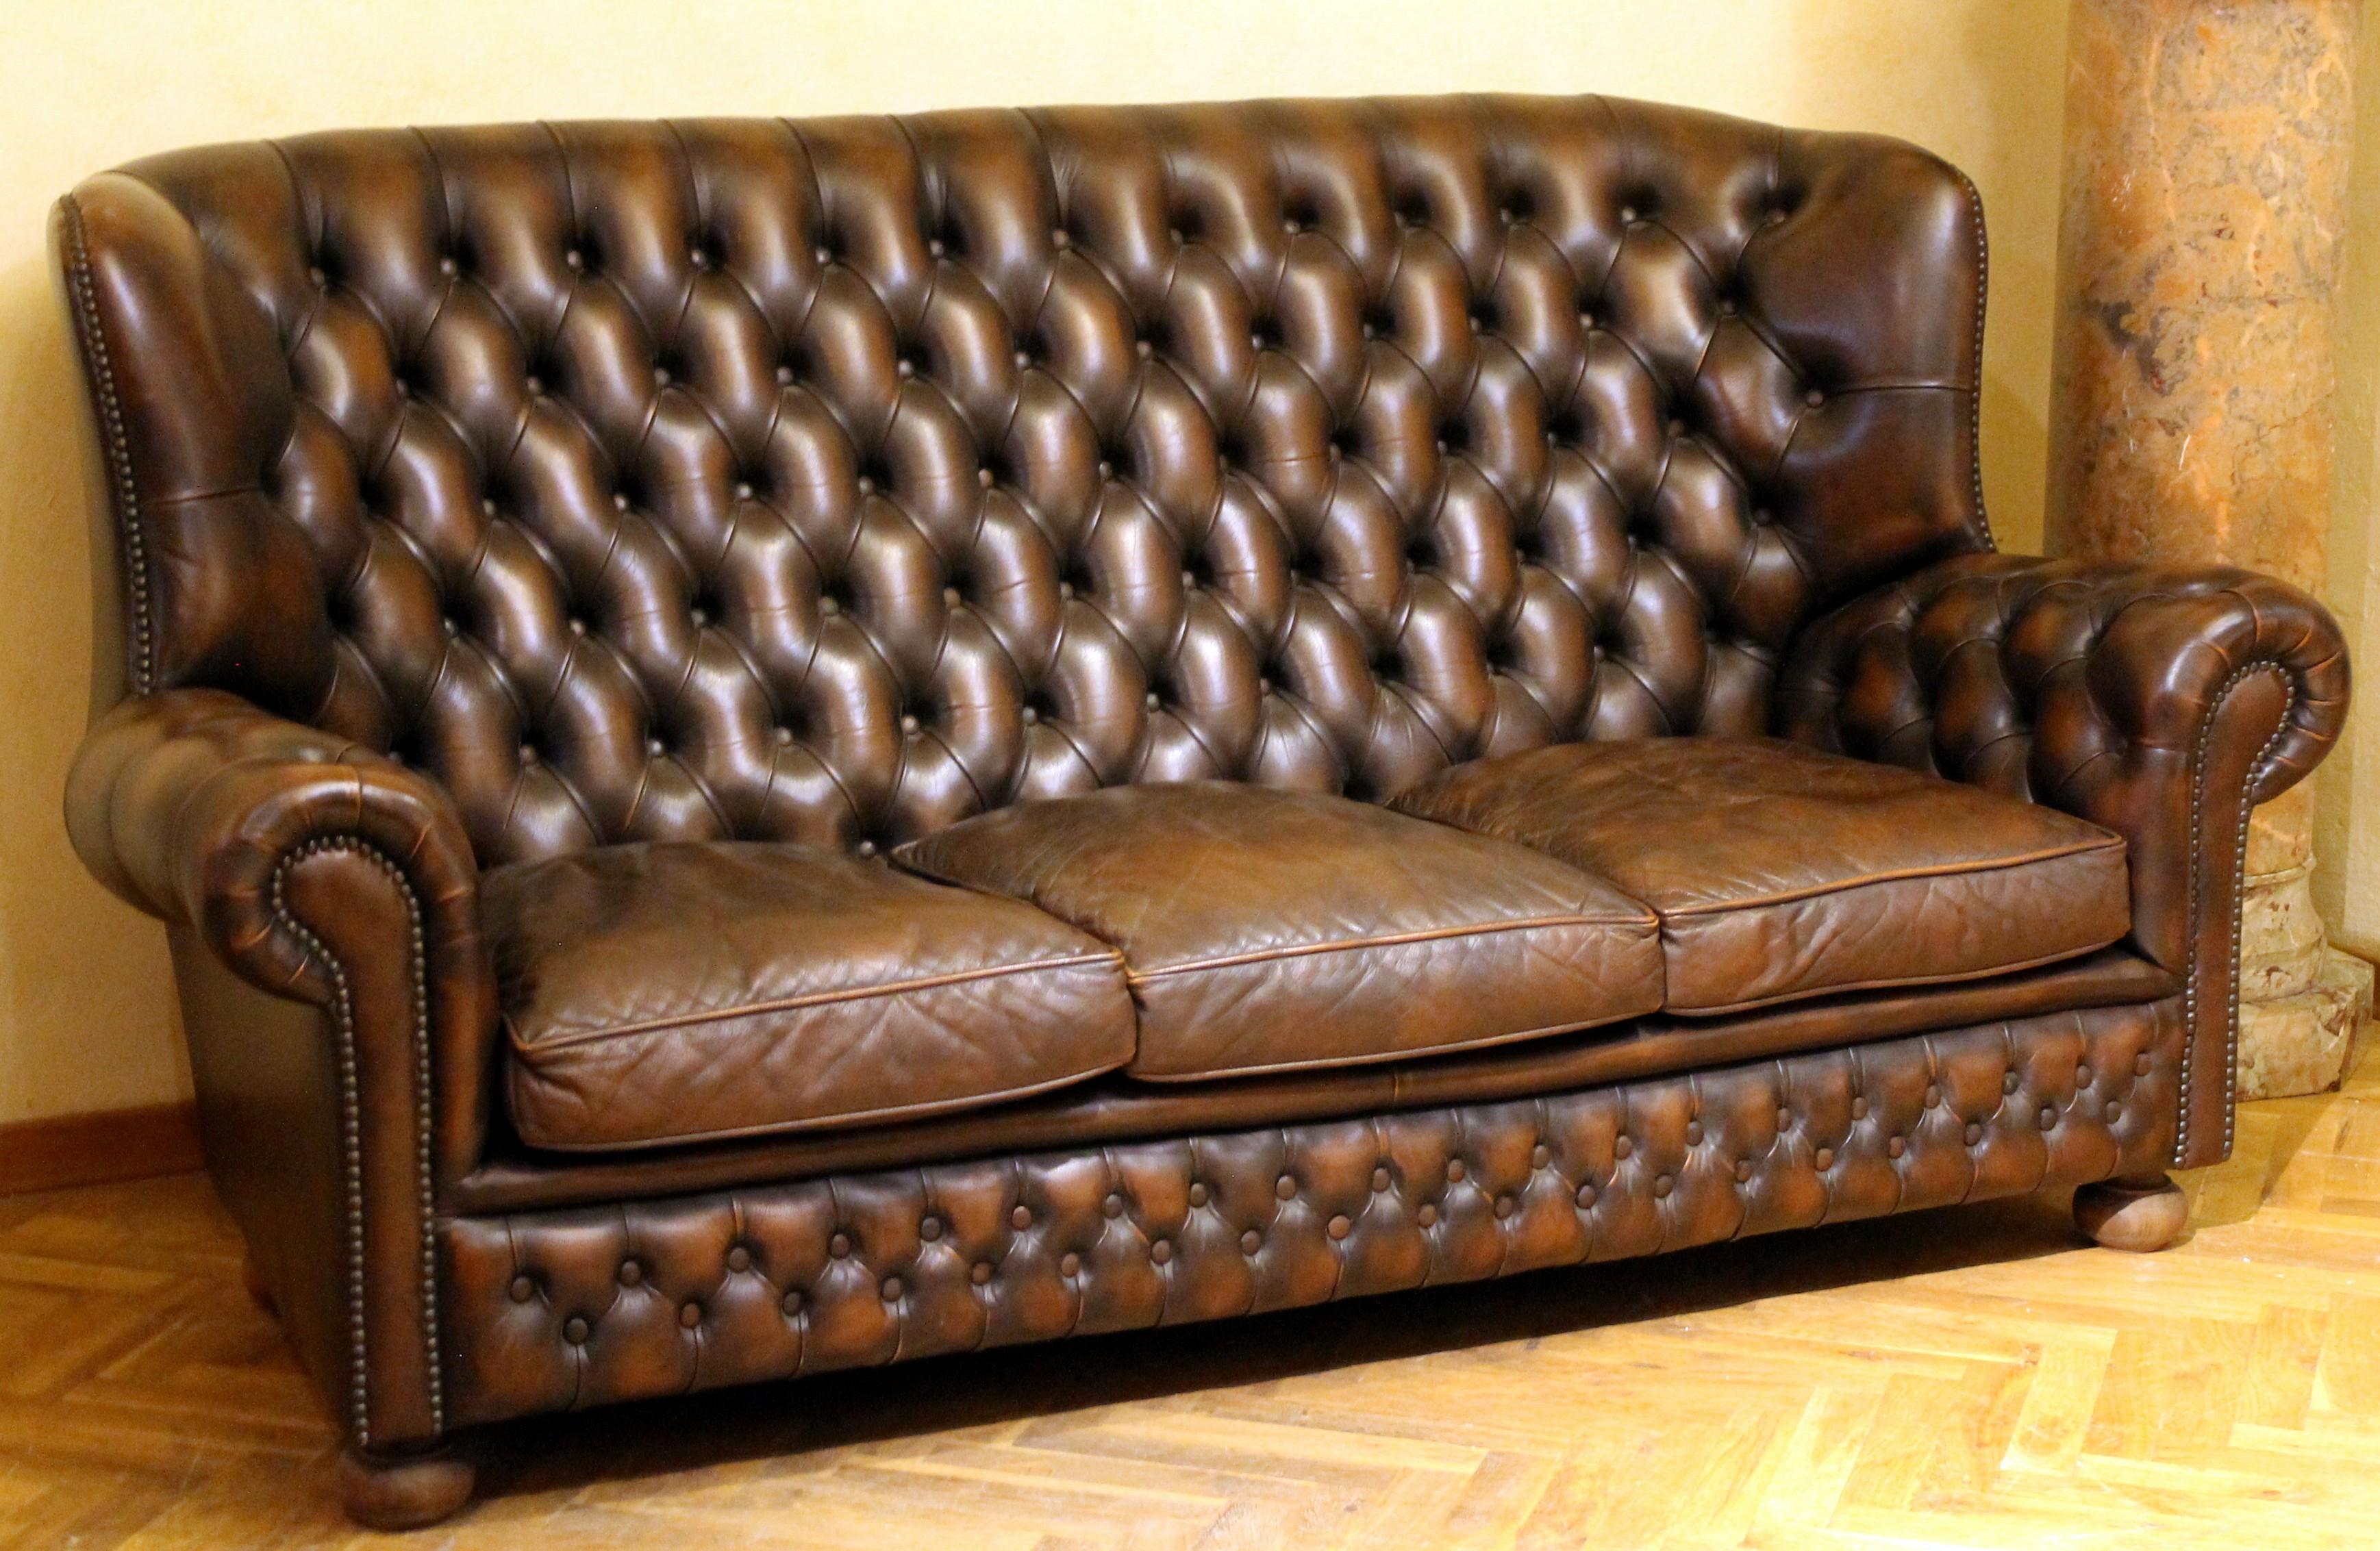 This English vintage brown leather Chesterfield sofa with button trufted back and arms offers three seats and high back, striking profile thanks to slight winged back, scrolled arms and gently scalloped back rail, the all resting on solid turned